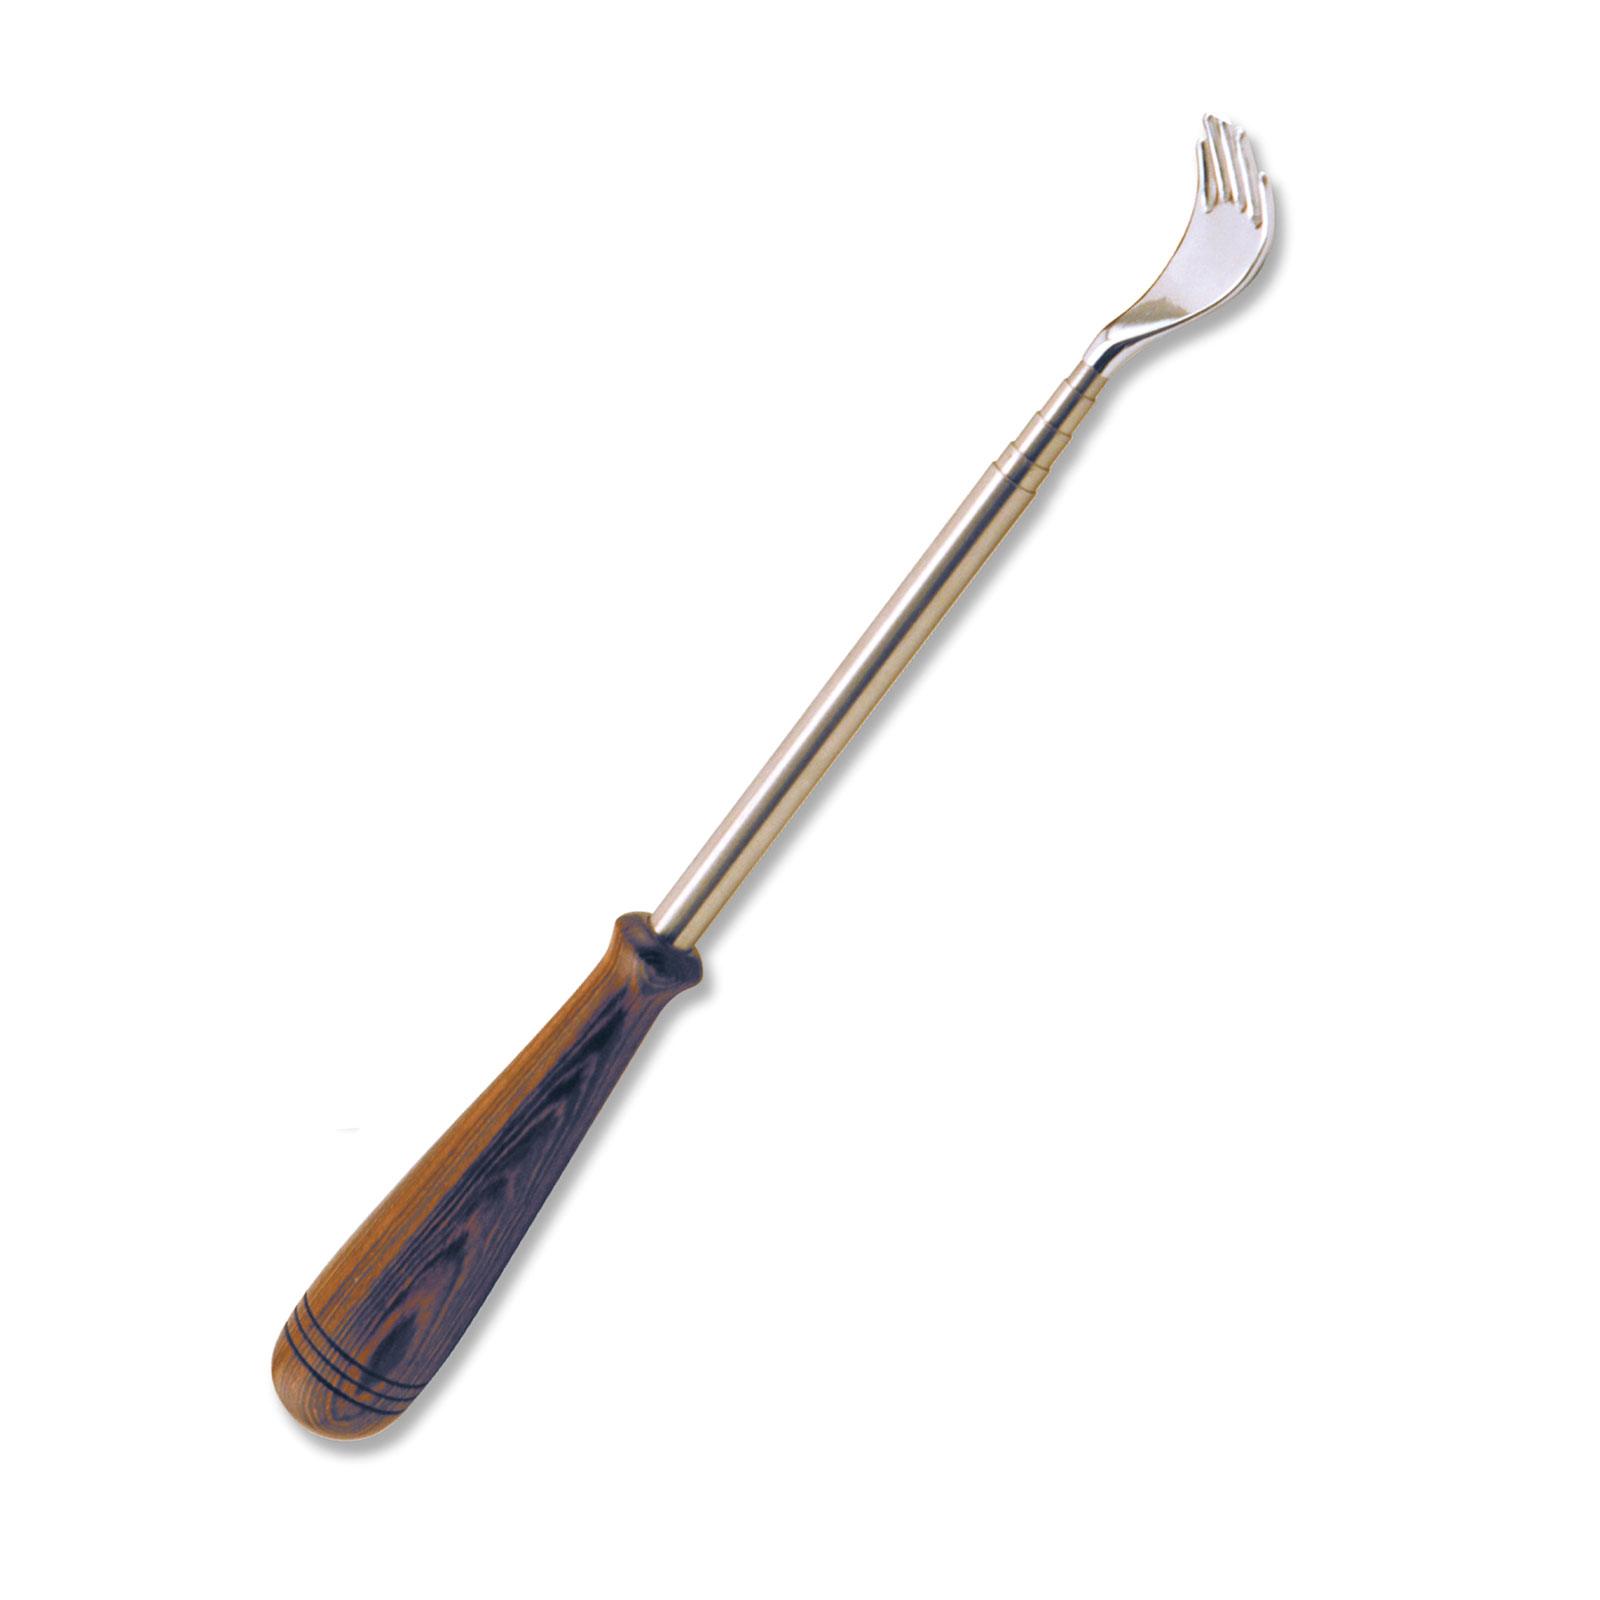 Chrome Telescoping Back Scratcher Kit at Penn State Industries